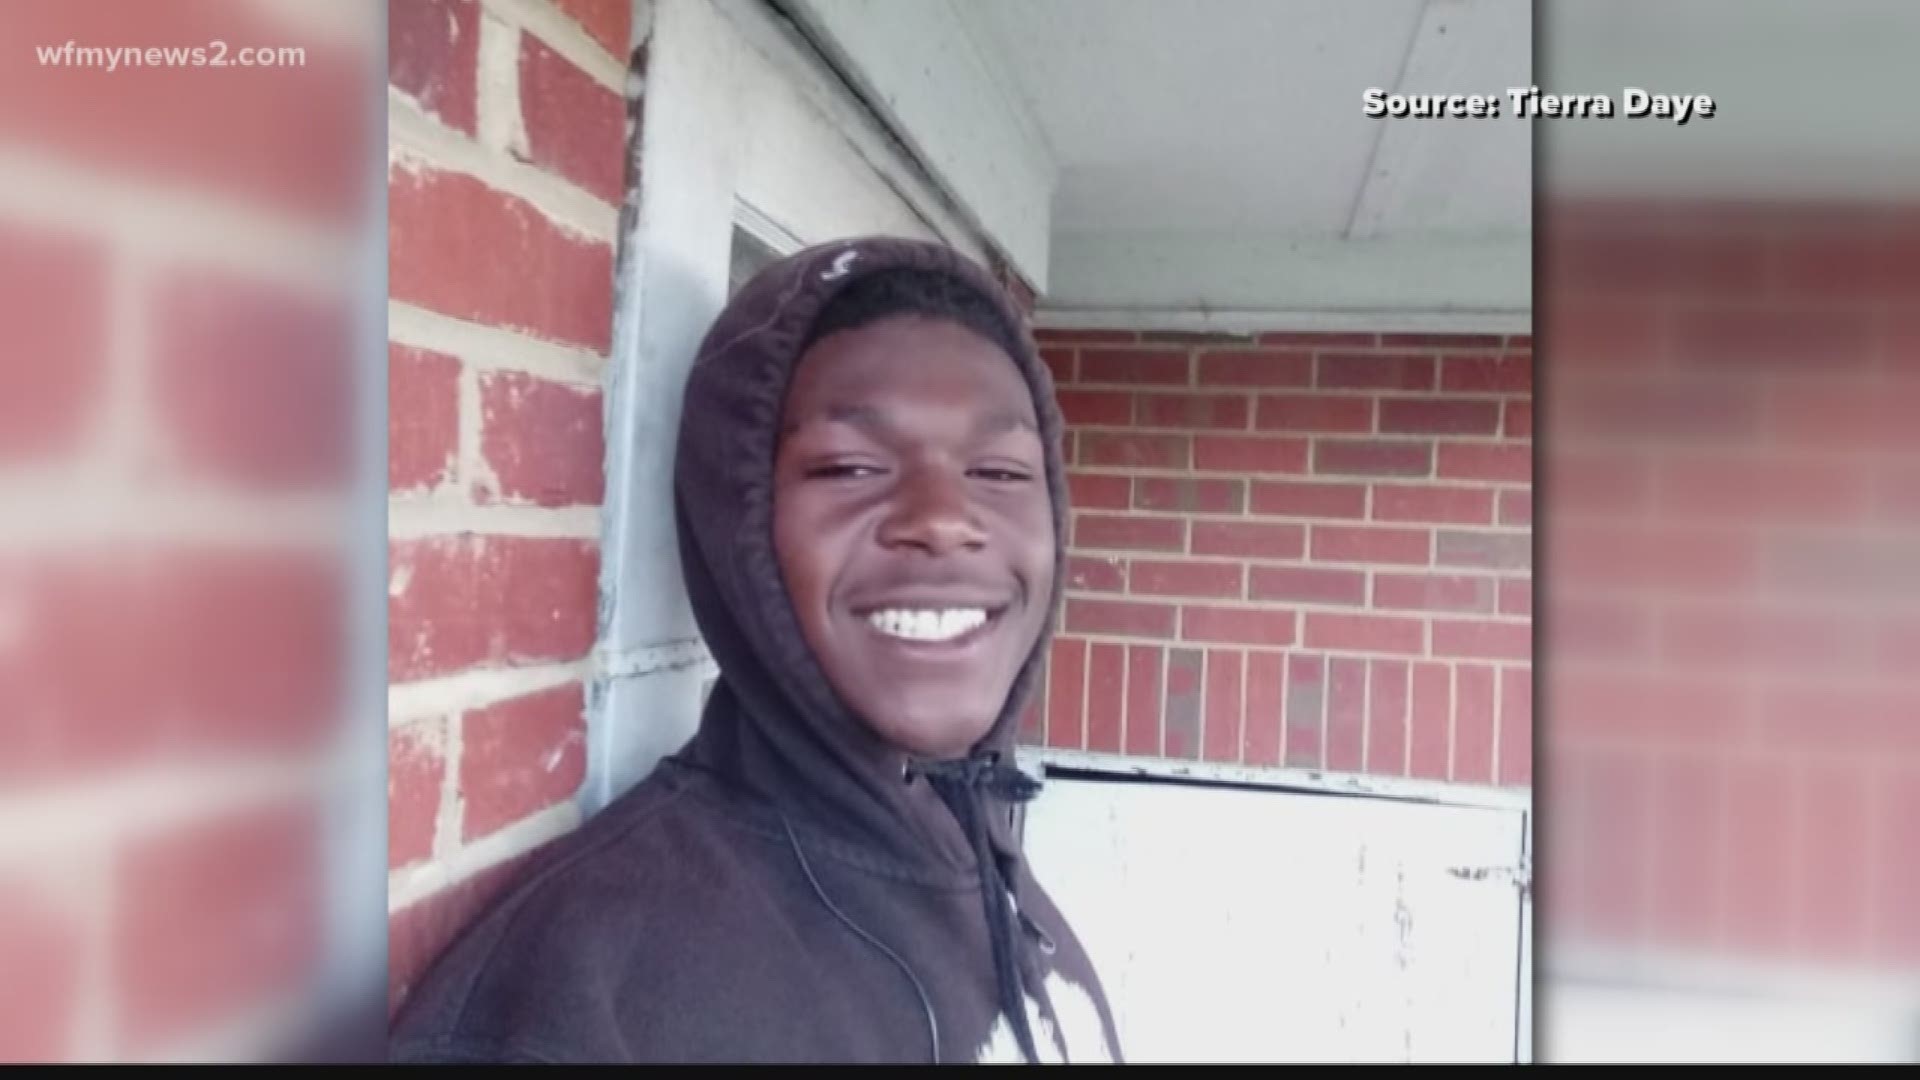 Police say he died on the scene. 21-year-old Torrance Daye Junior was also shot. He was taken to the hospital, treated and released.